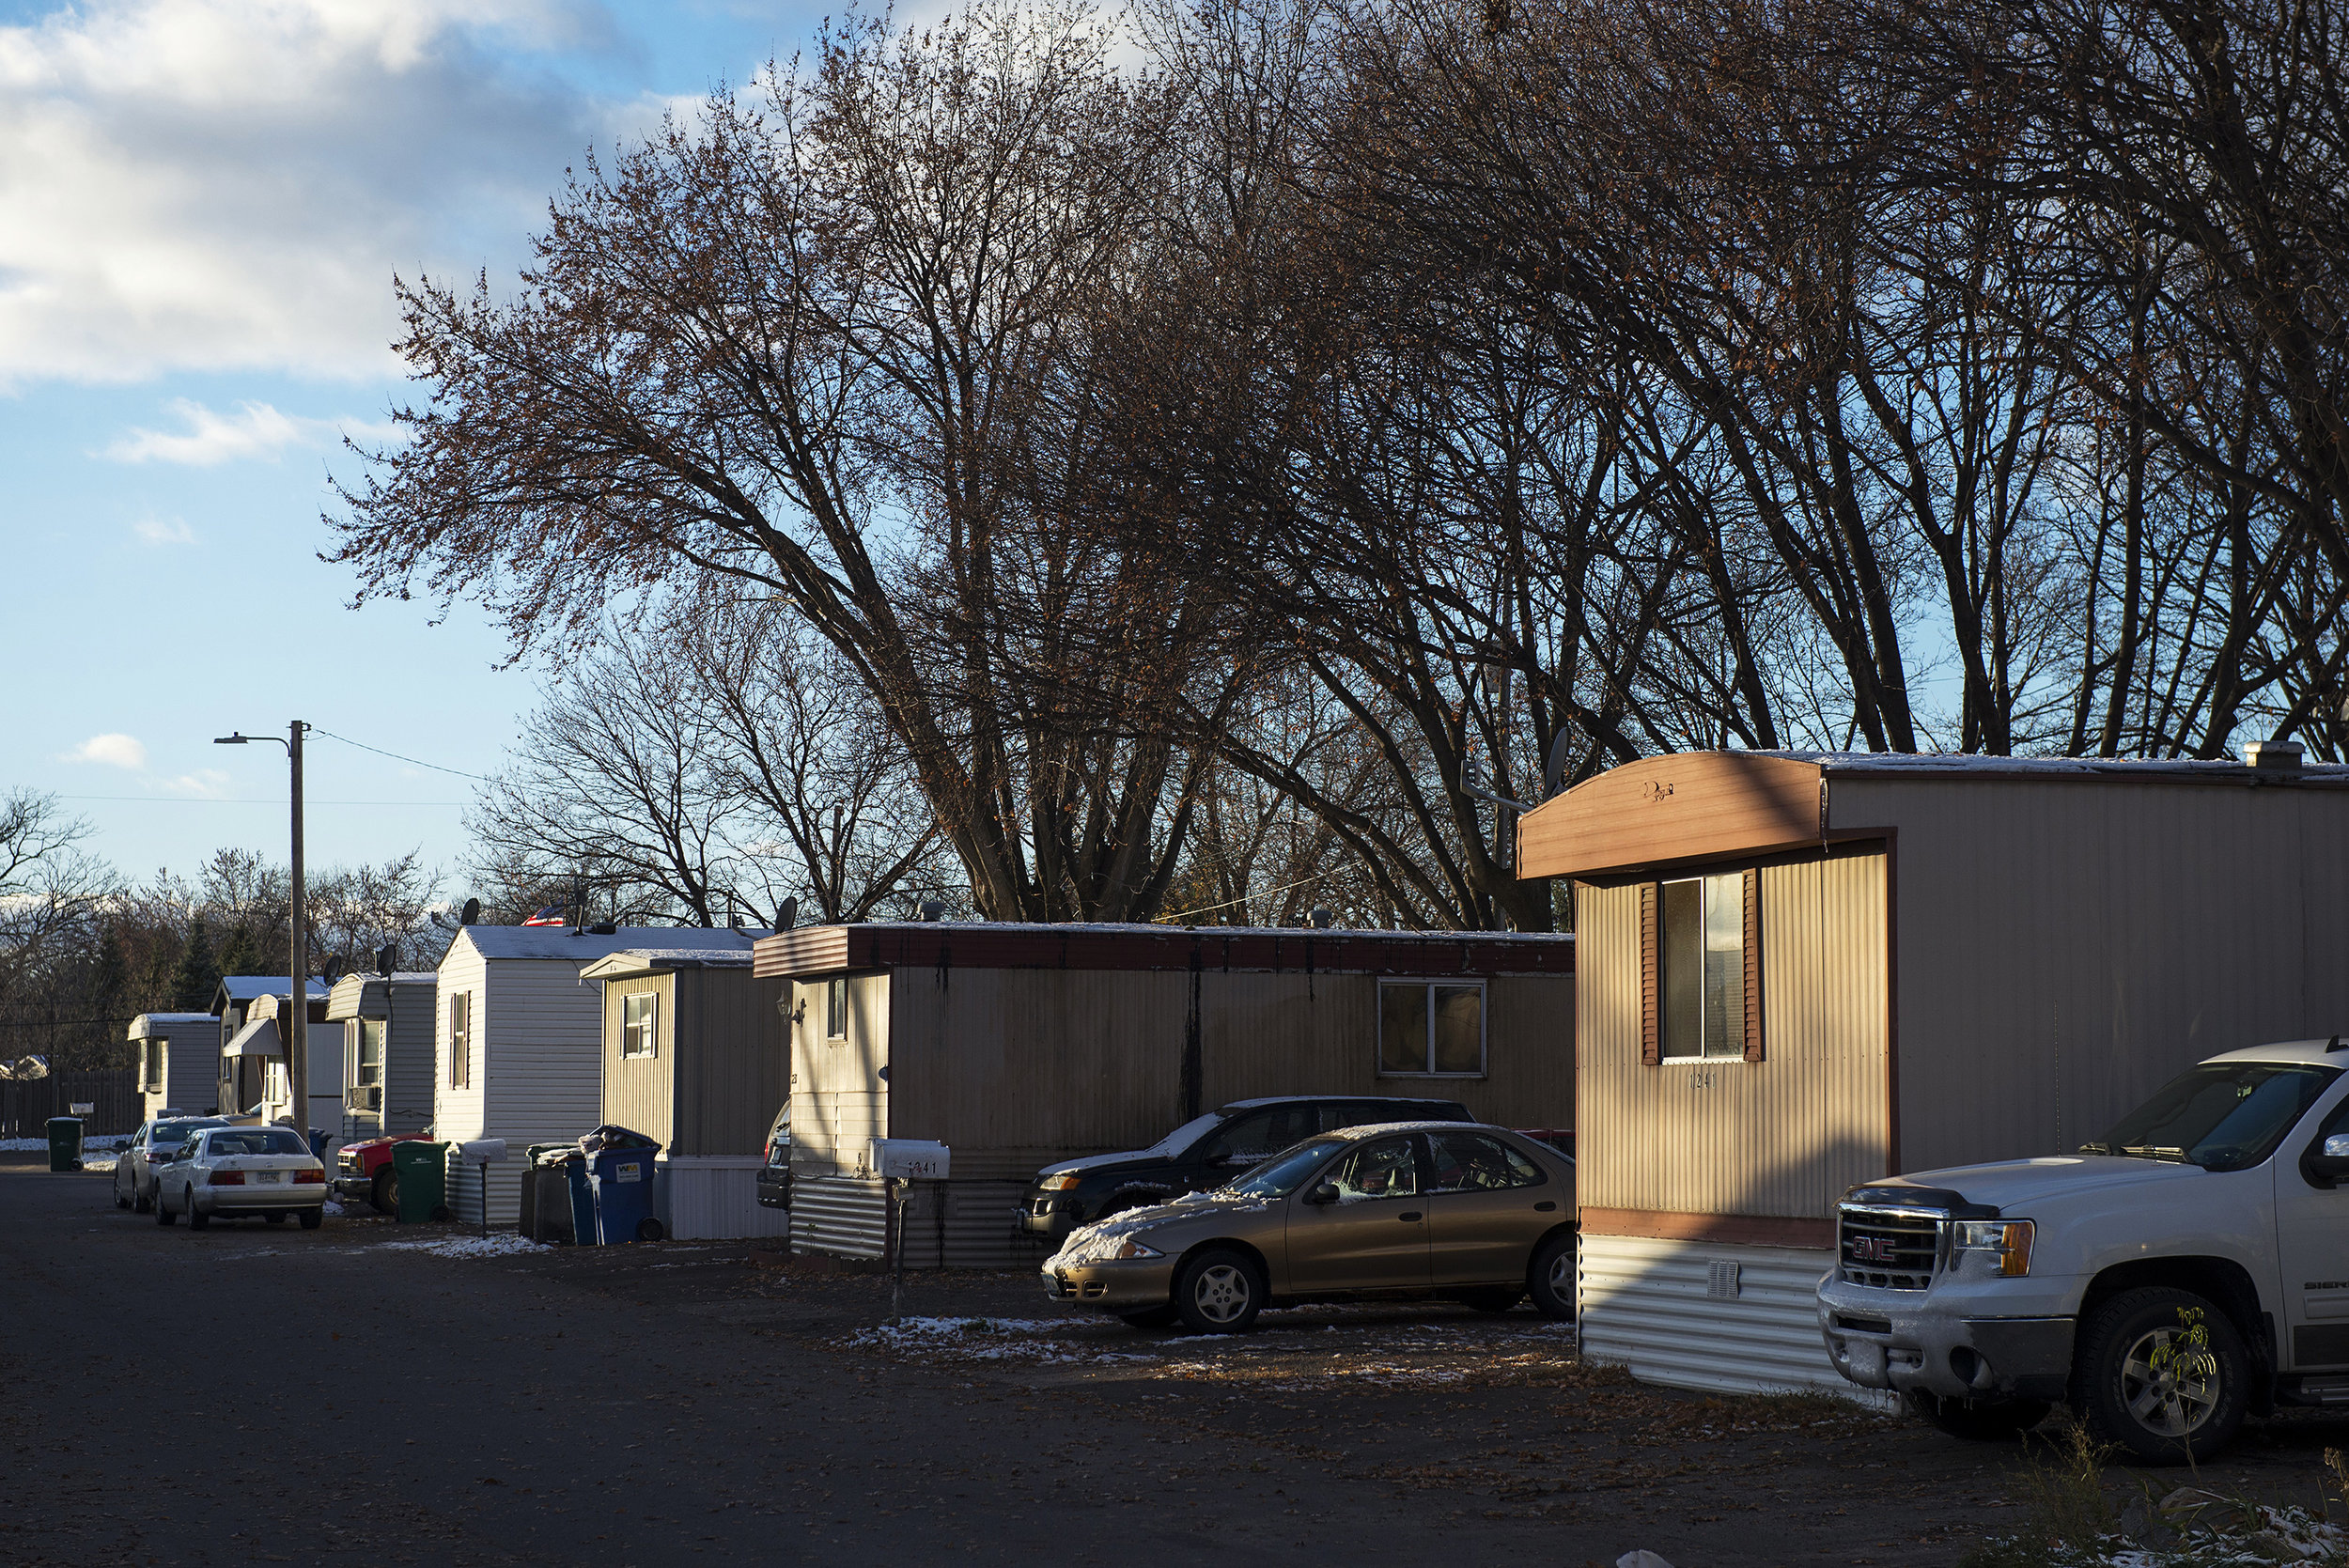 Mobile home park under coop ownership